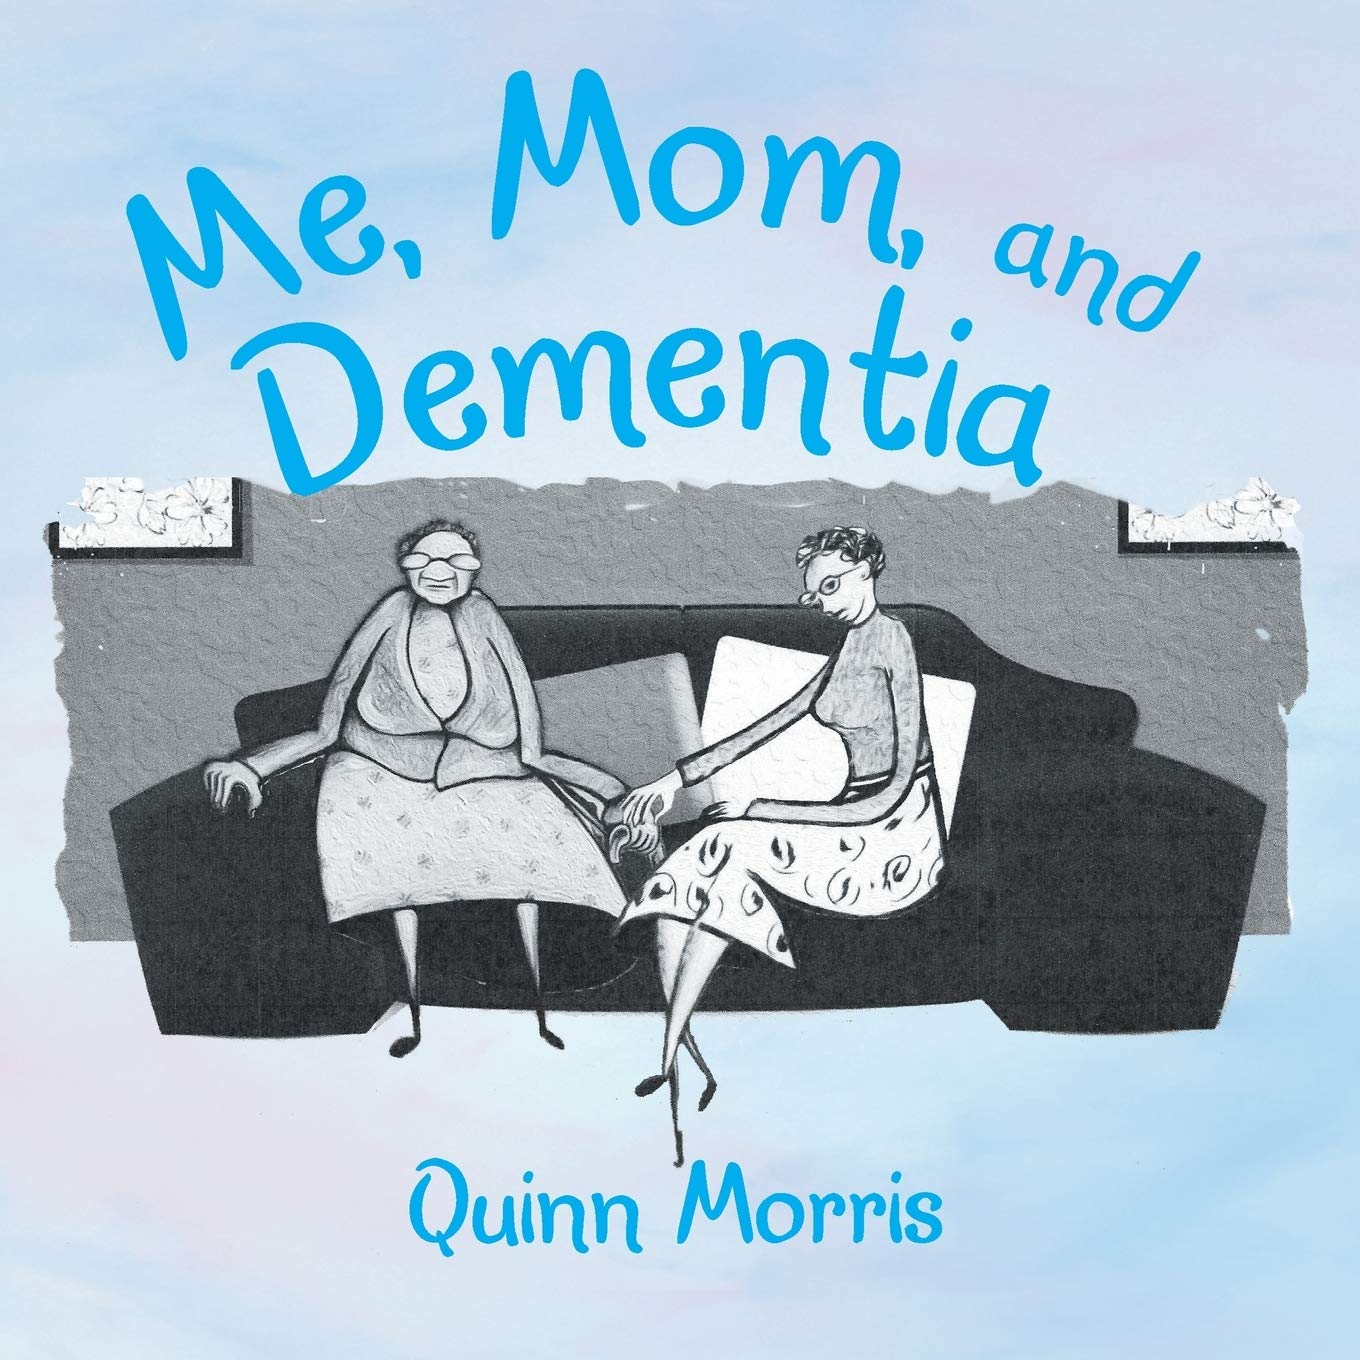 Quinn Morris’s Me, Mom, and Dementia Gets the Attention of Author’s Tranquility Press